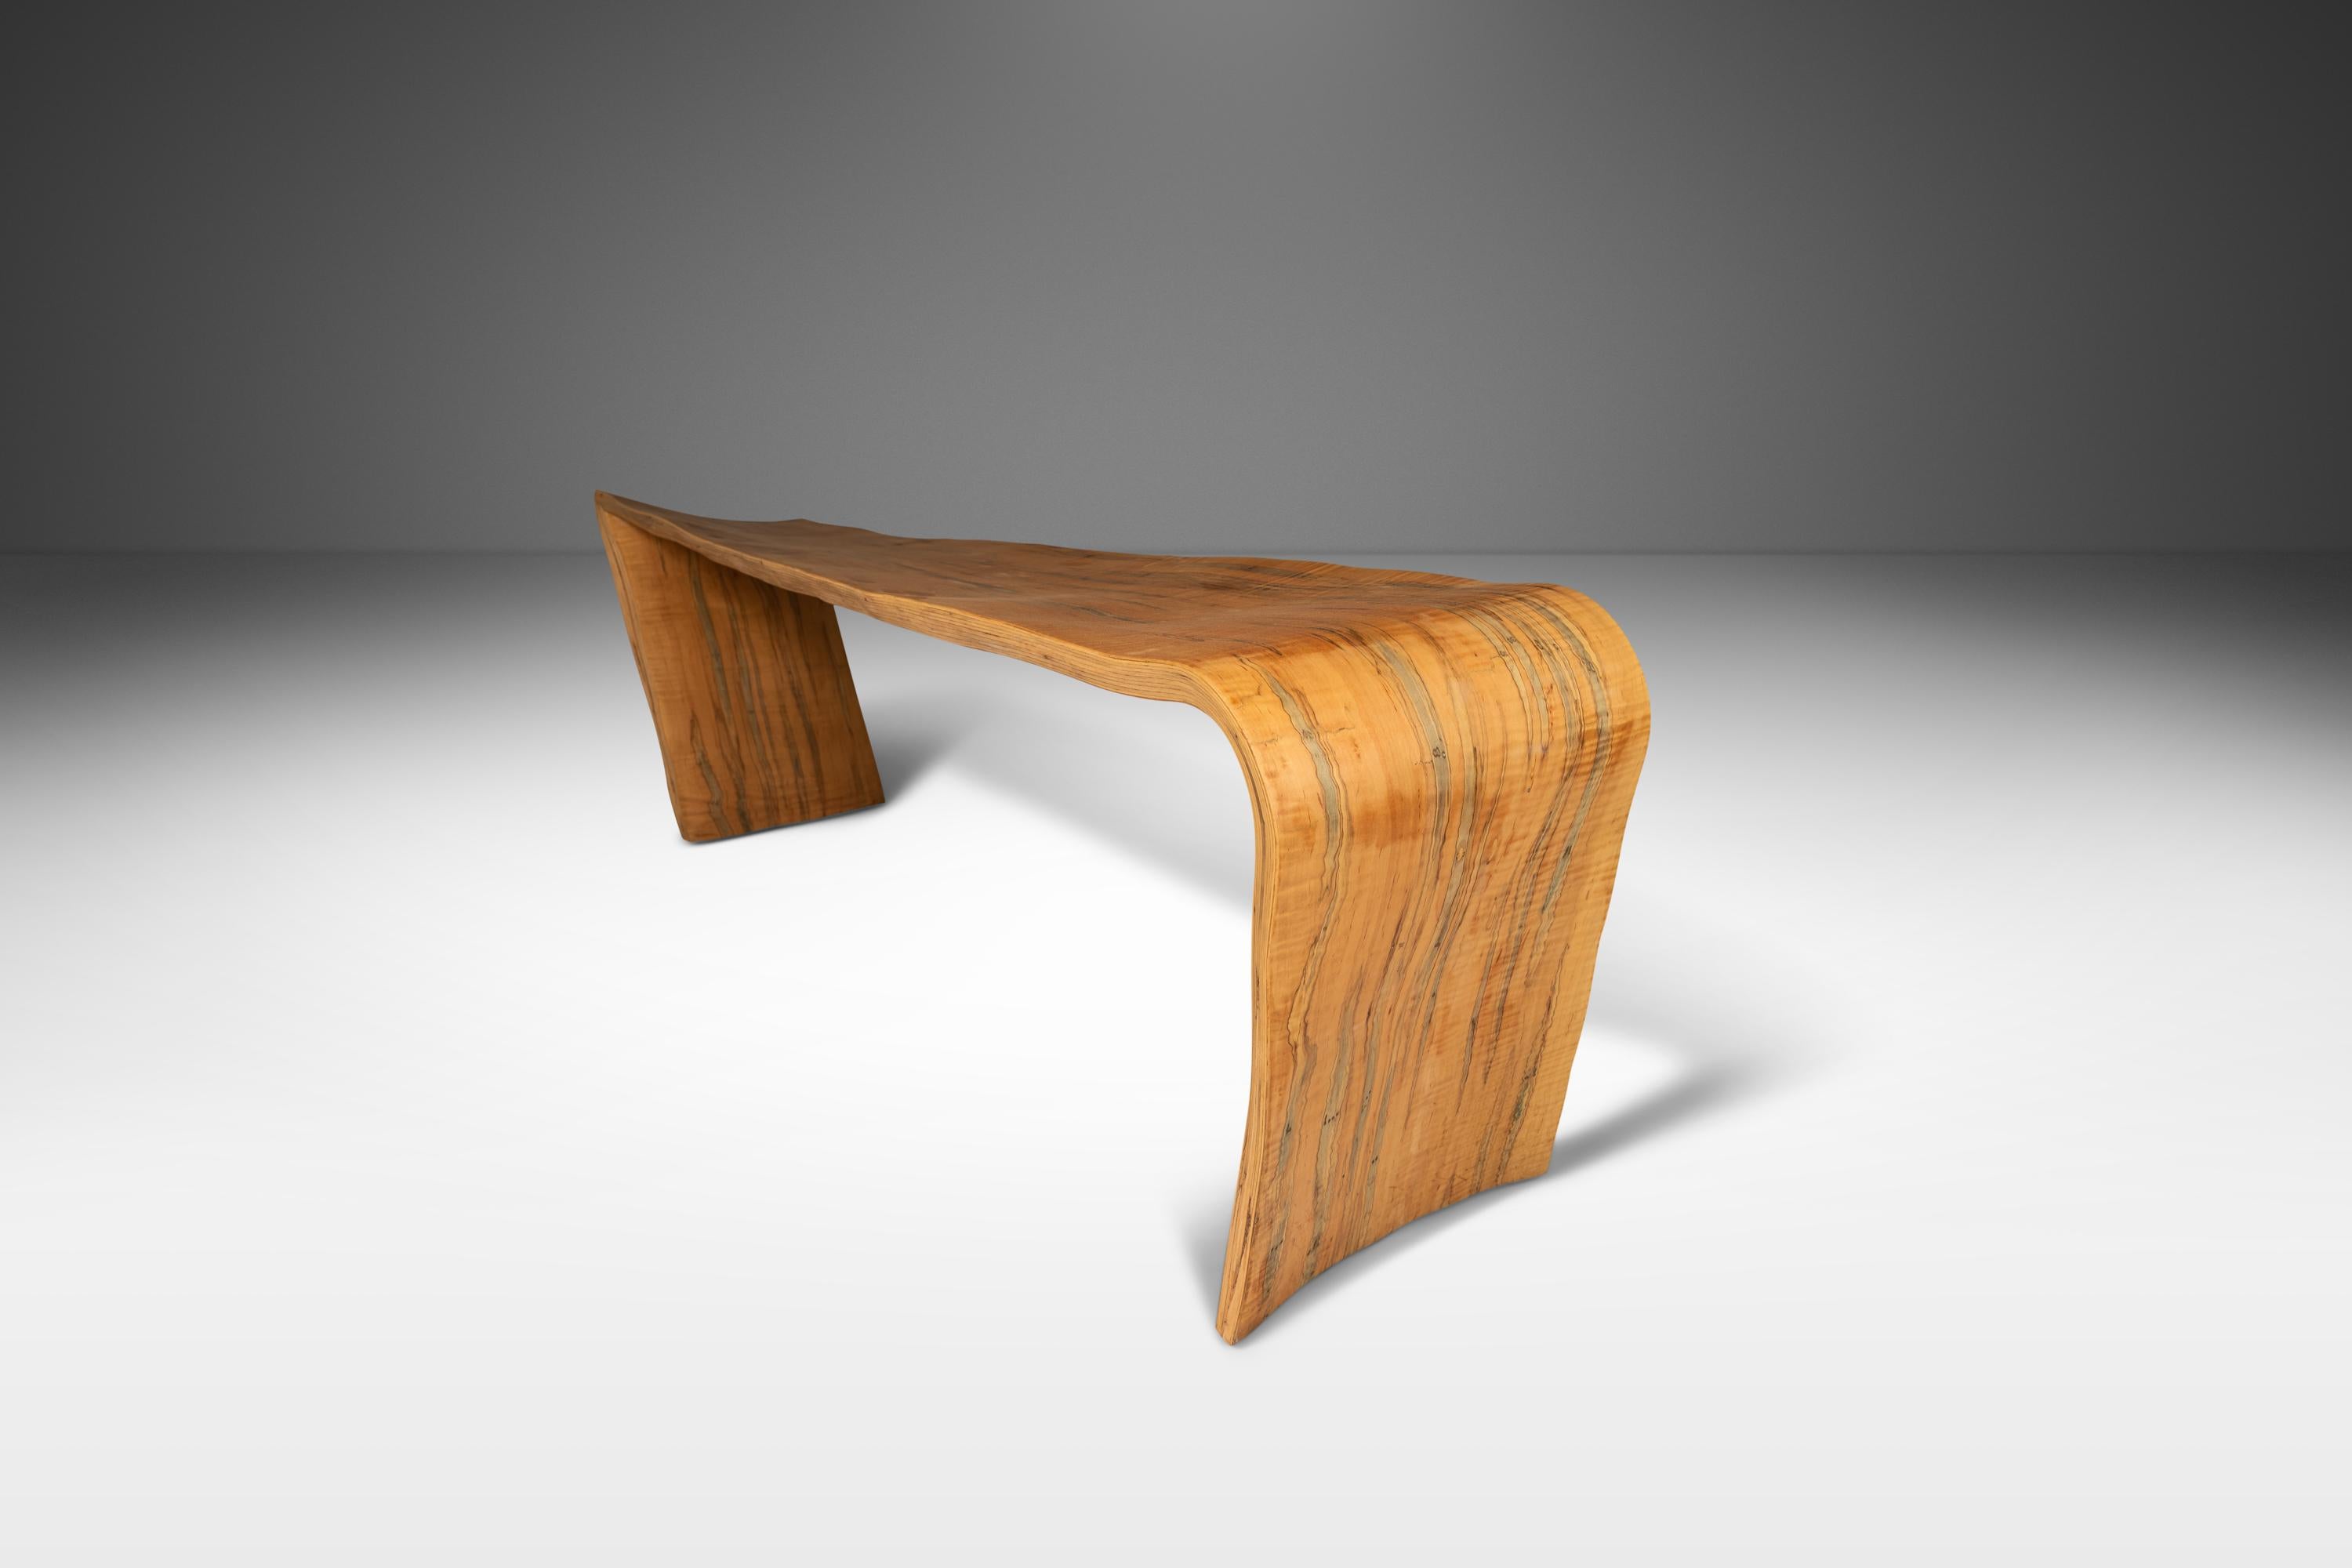 Mid-Century Modern Bentwood Asymmetrical Abstract Three Seater Bench in Ambrosia Maple, Usa, 1980s For Sale